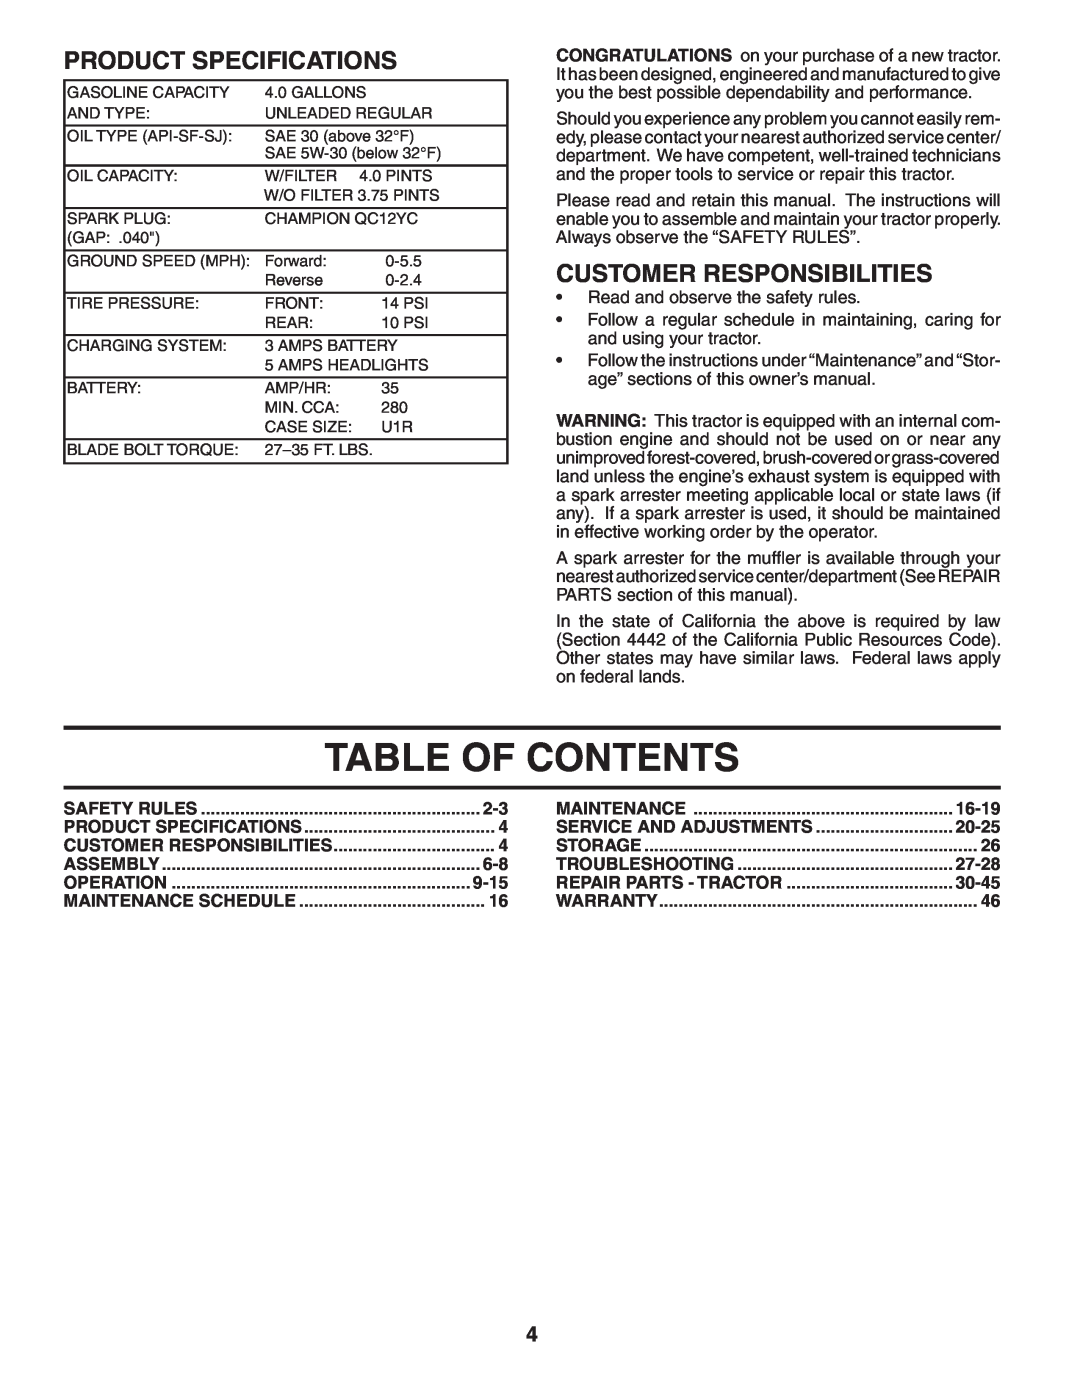 Poulan 188781 owner manual Table Of Contents, Product Specifications, Customer Responsibilities 